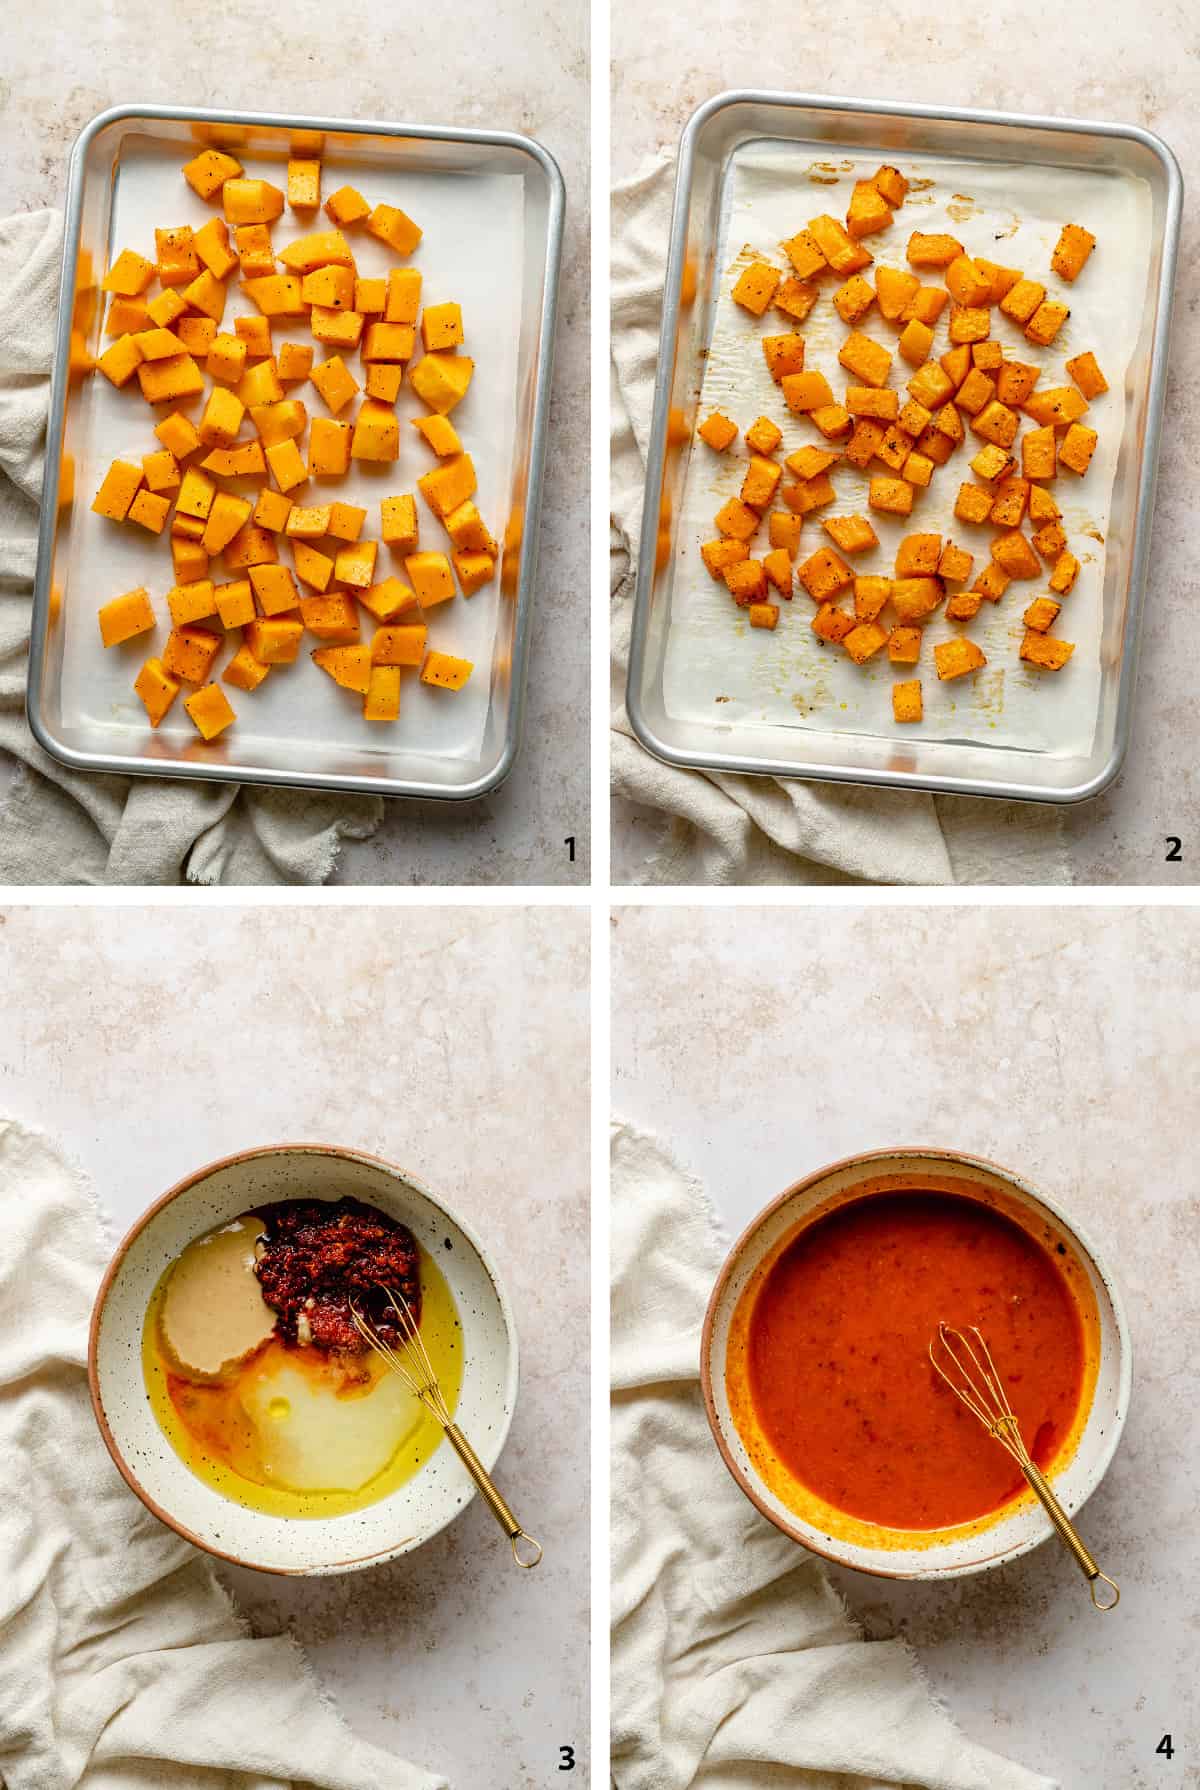 Process steps of roasting the butternut squash and whisking together the harissa dressing ingredients.